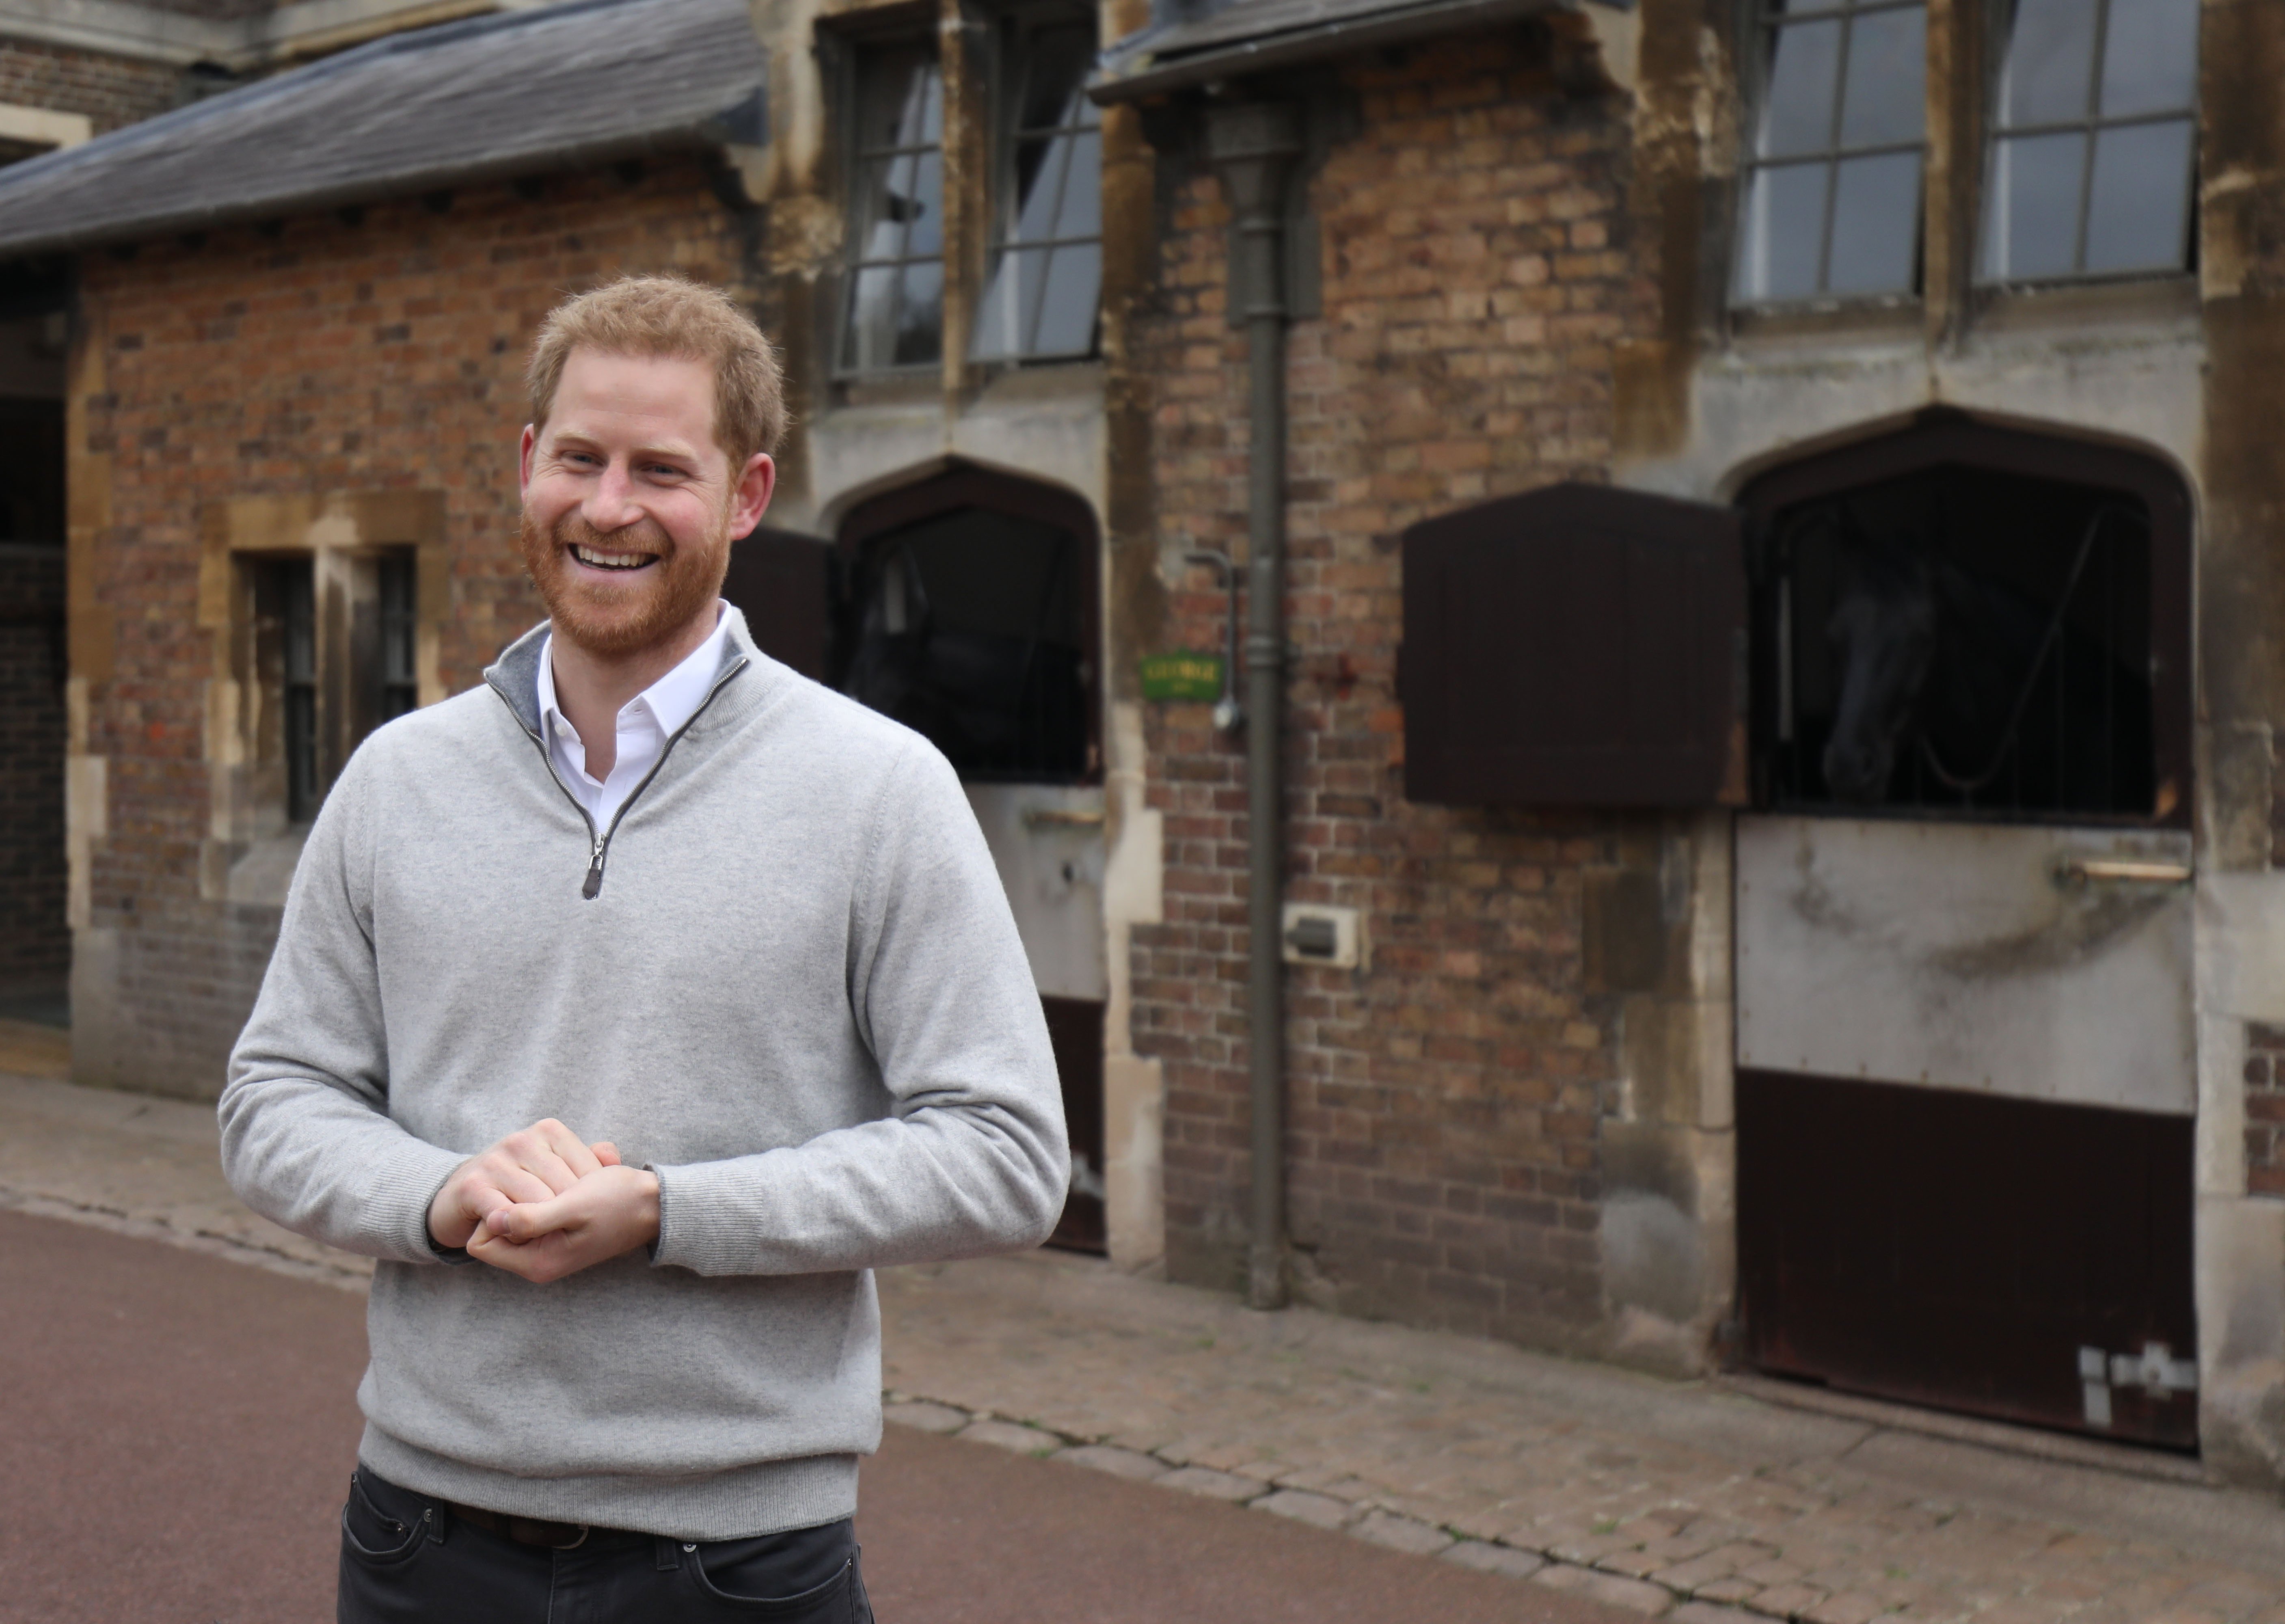 Prince Harry talking to the media about the birth of his first son at Windsor Castle | Photo: Getty Images